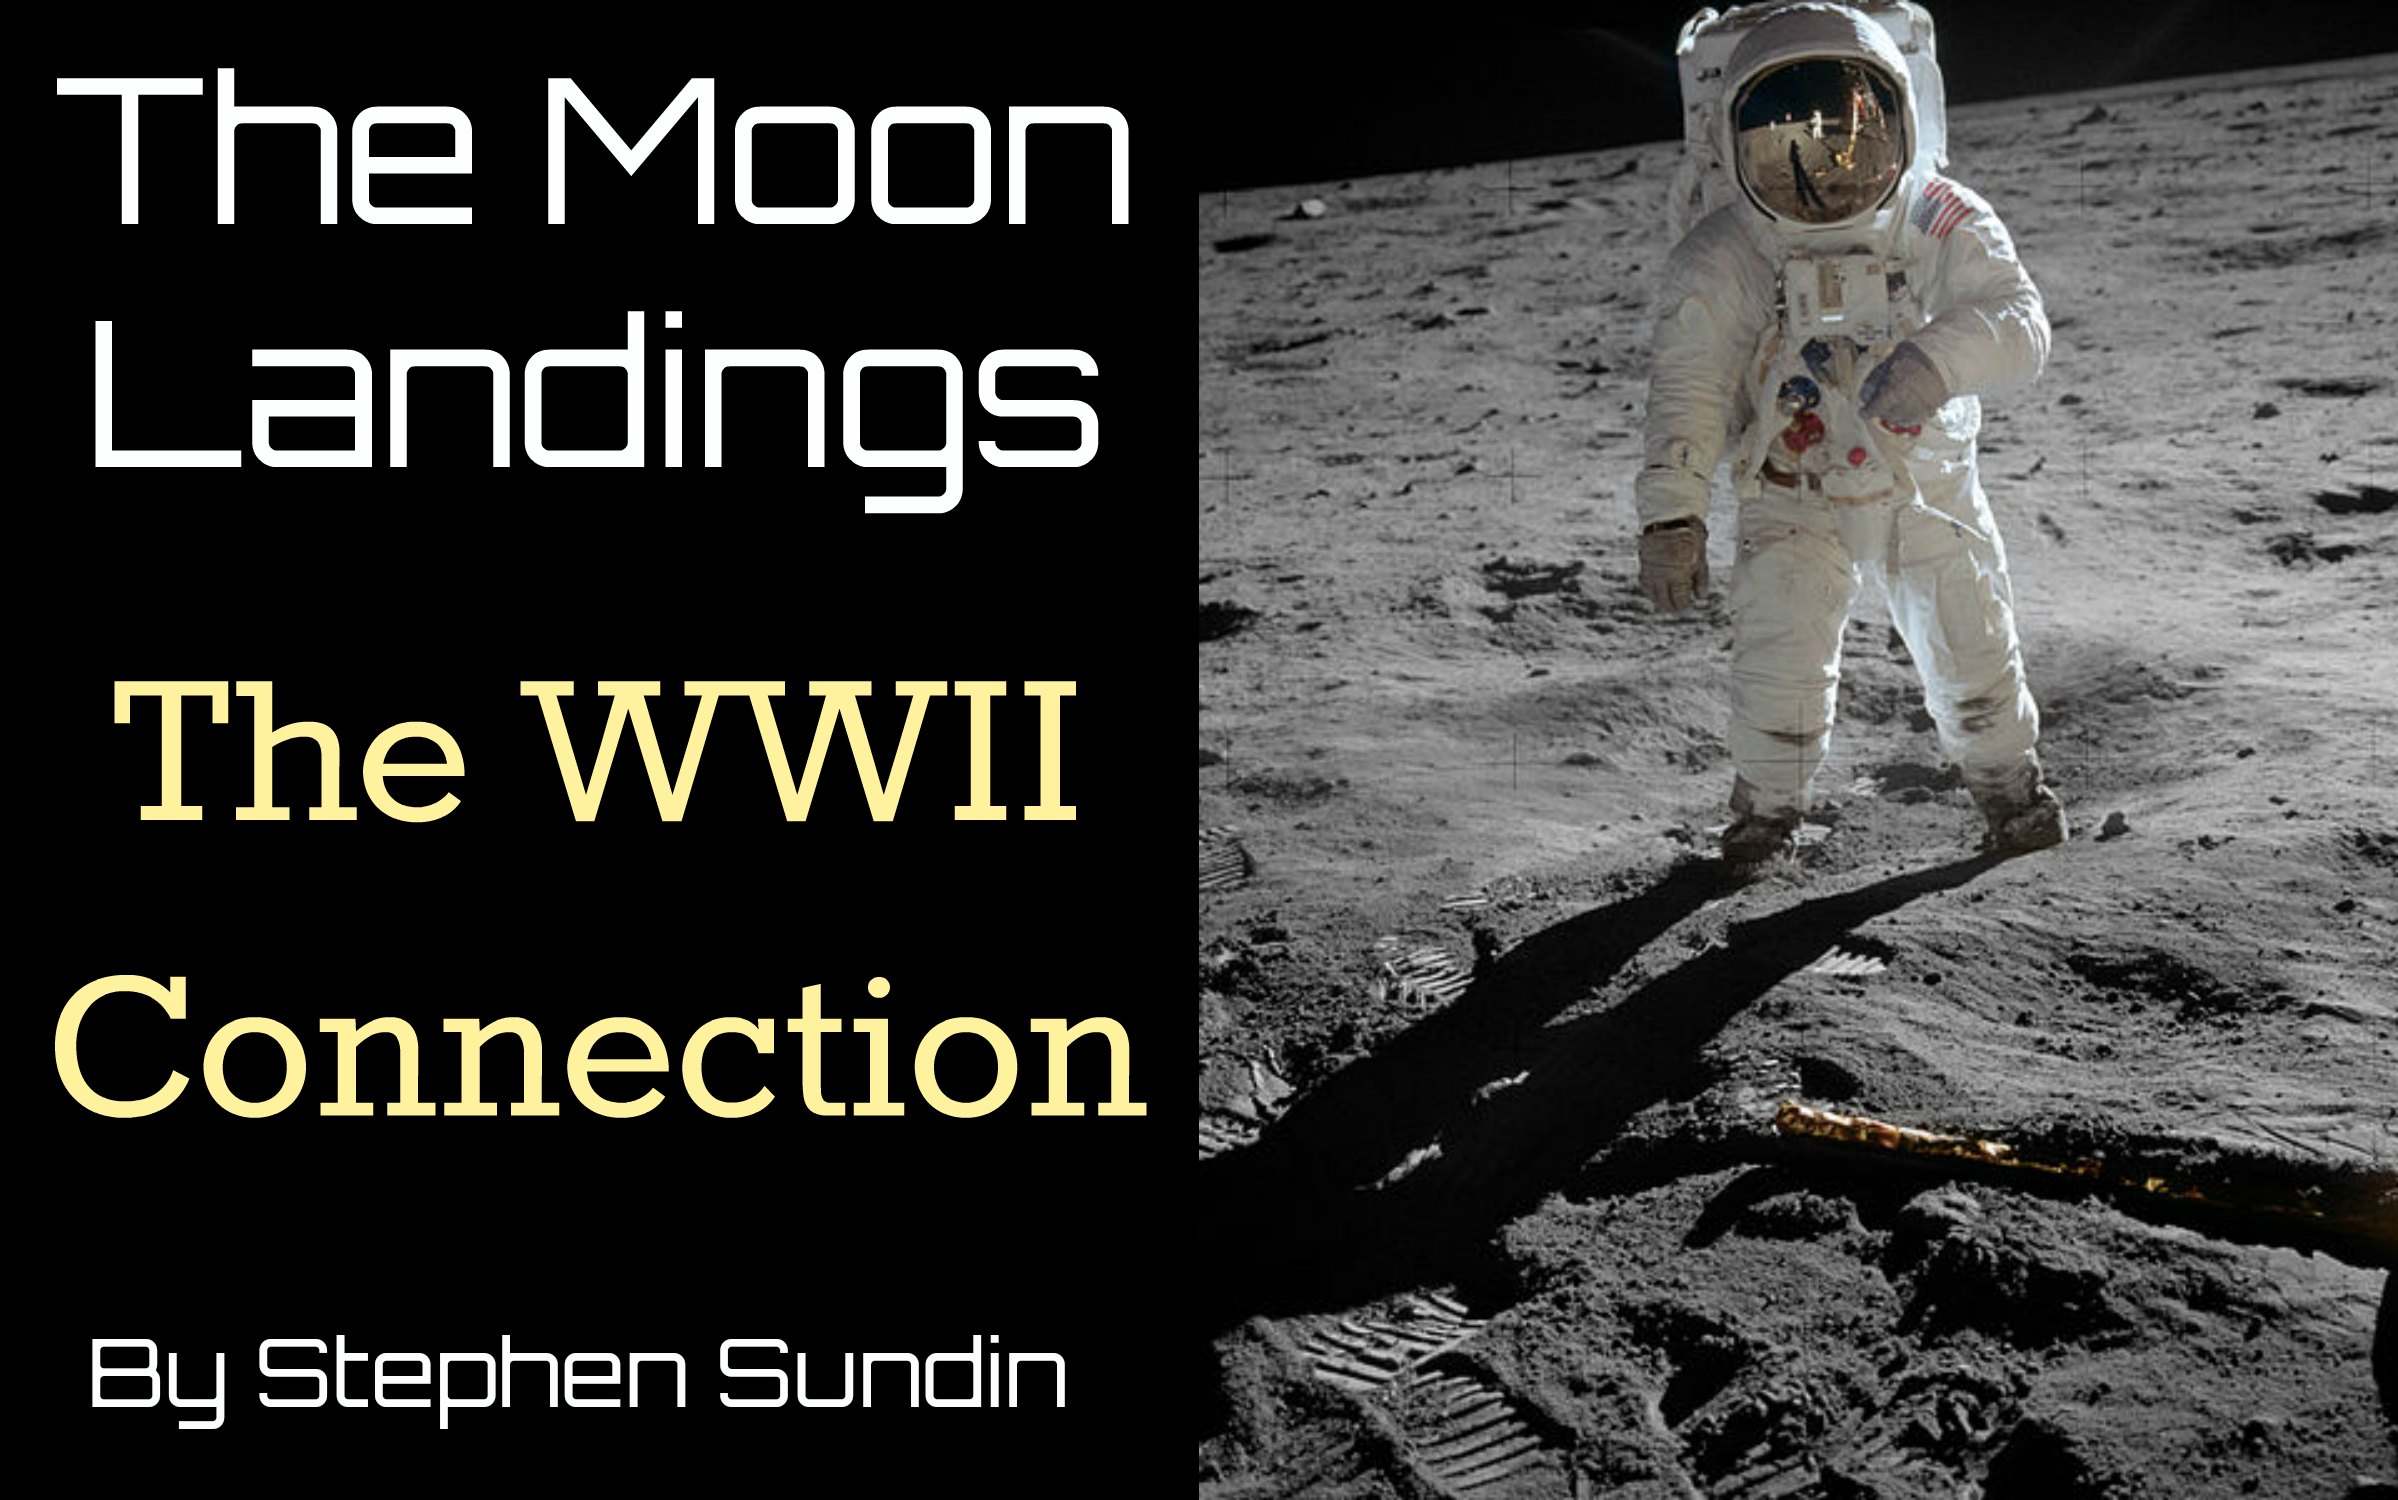 The Moon Landings—The World War II Connection